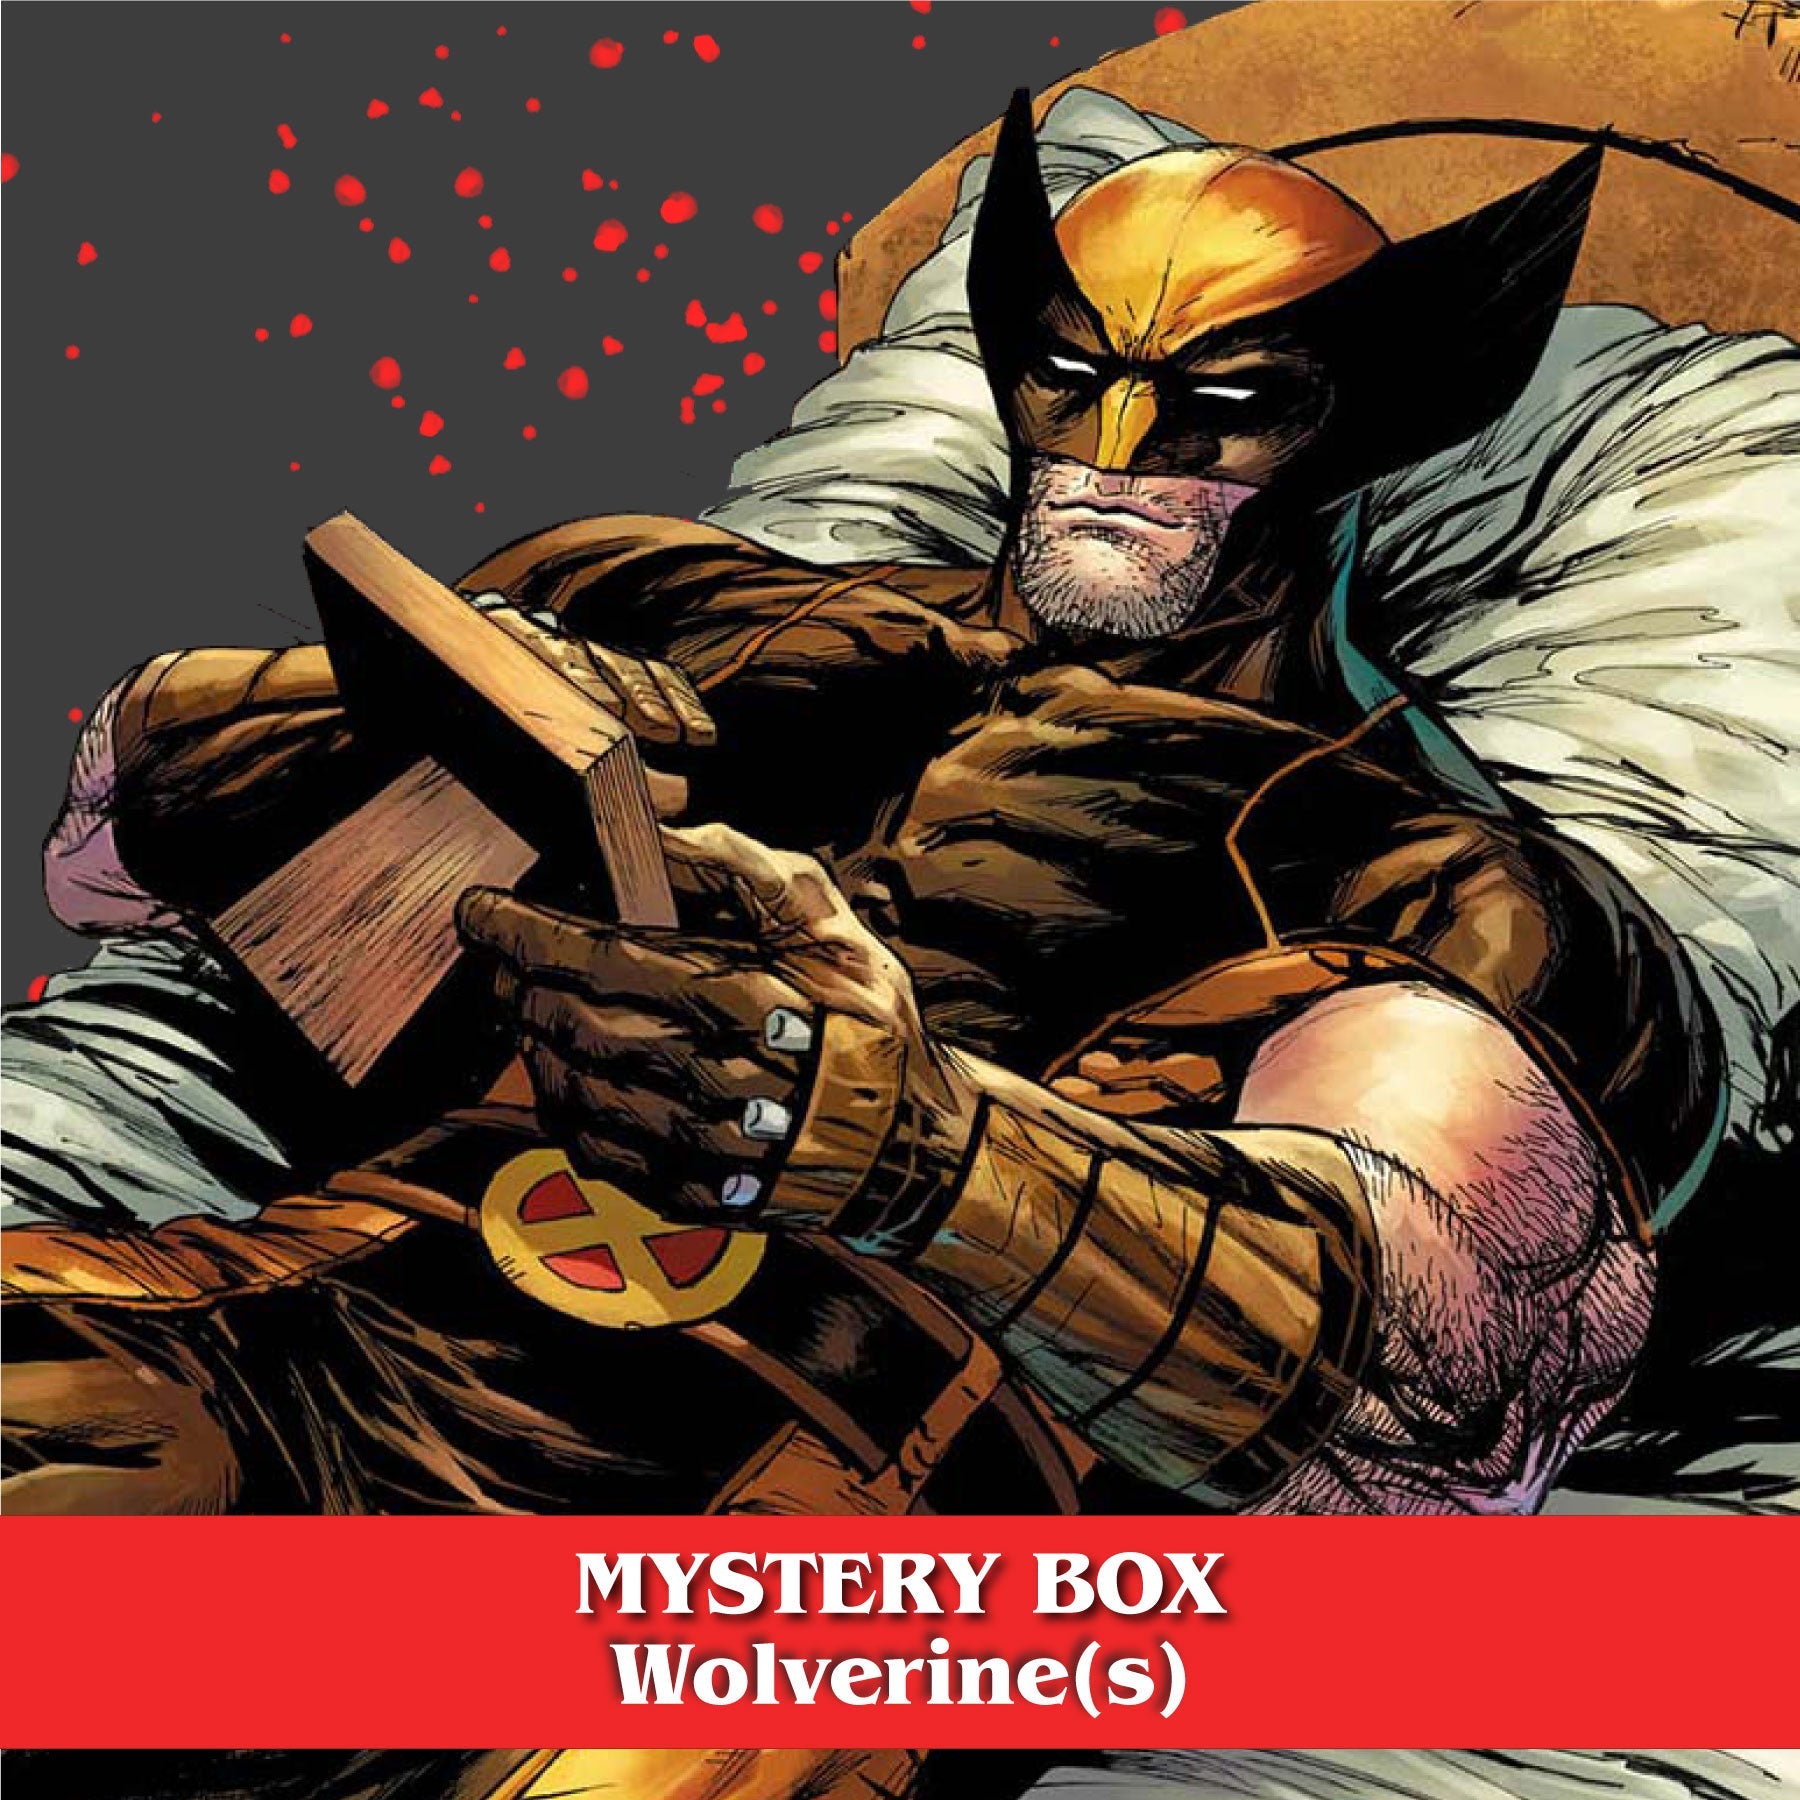 [5 PACK] UNKNOWN COMICS MYSTERY THEMED 👉WOLVERINE(S) EXCLUSIVE BOX 👉VIRGIN (12/21/2022)